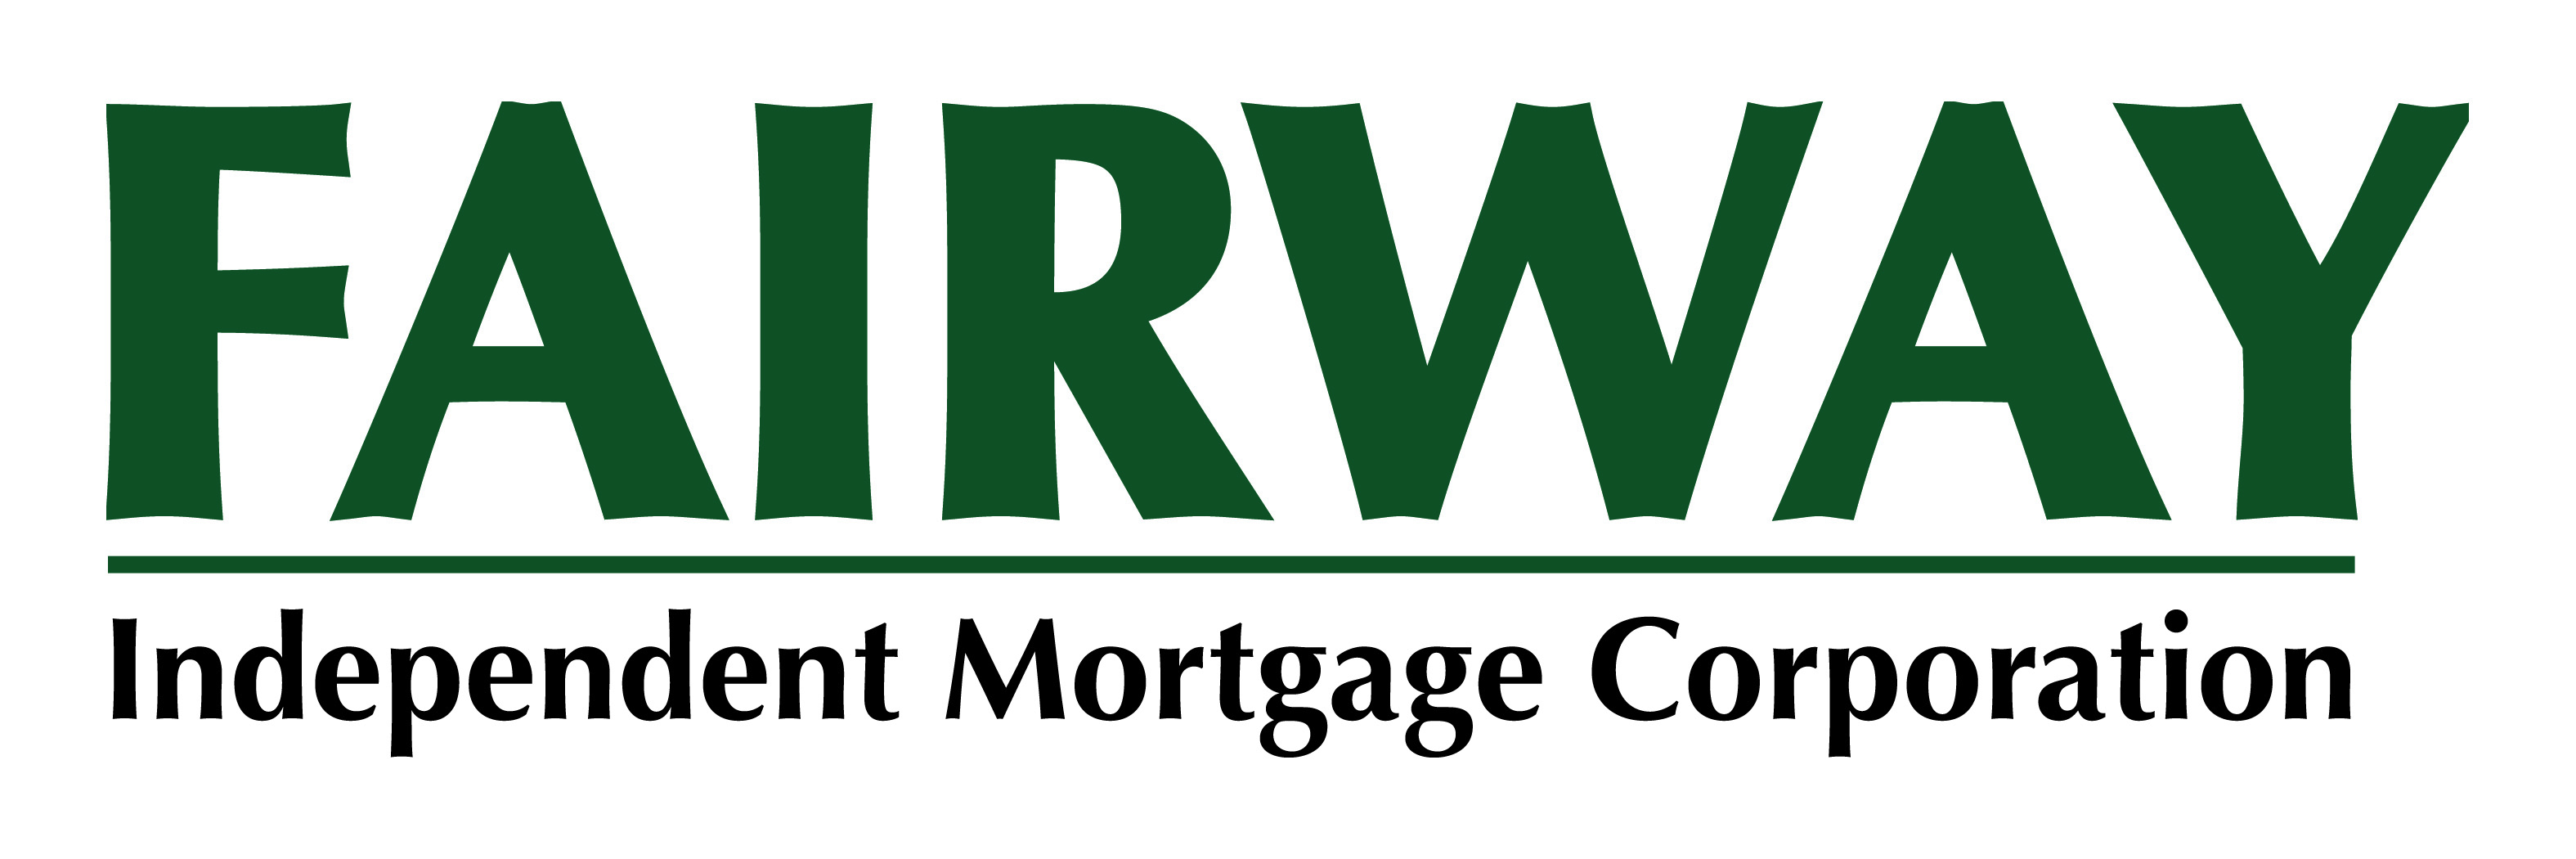 The Future of Fairway Independent Mortgage